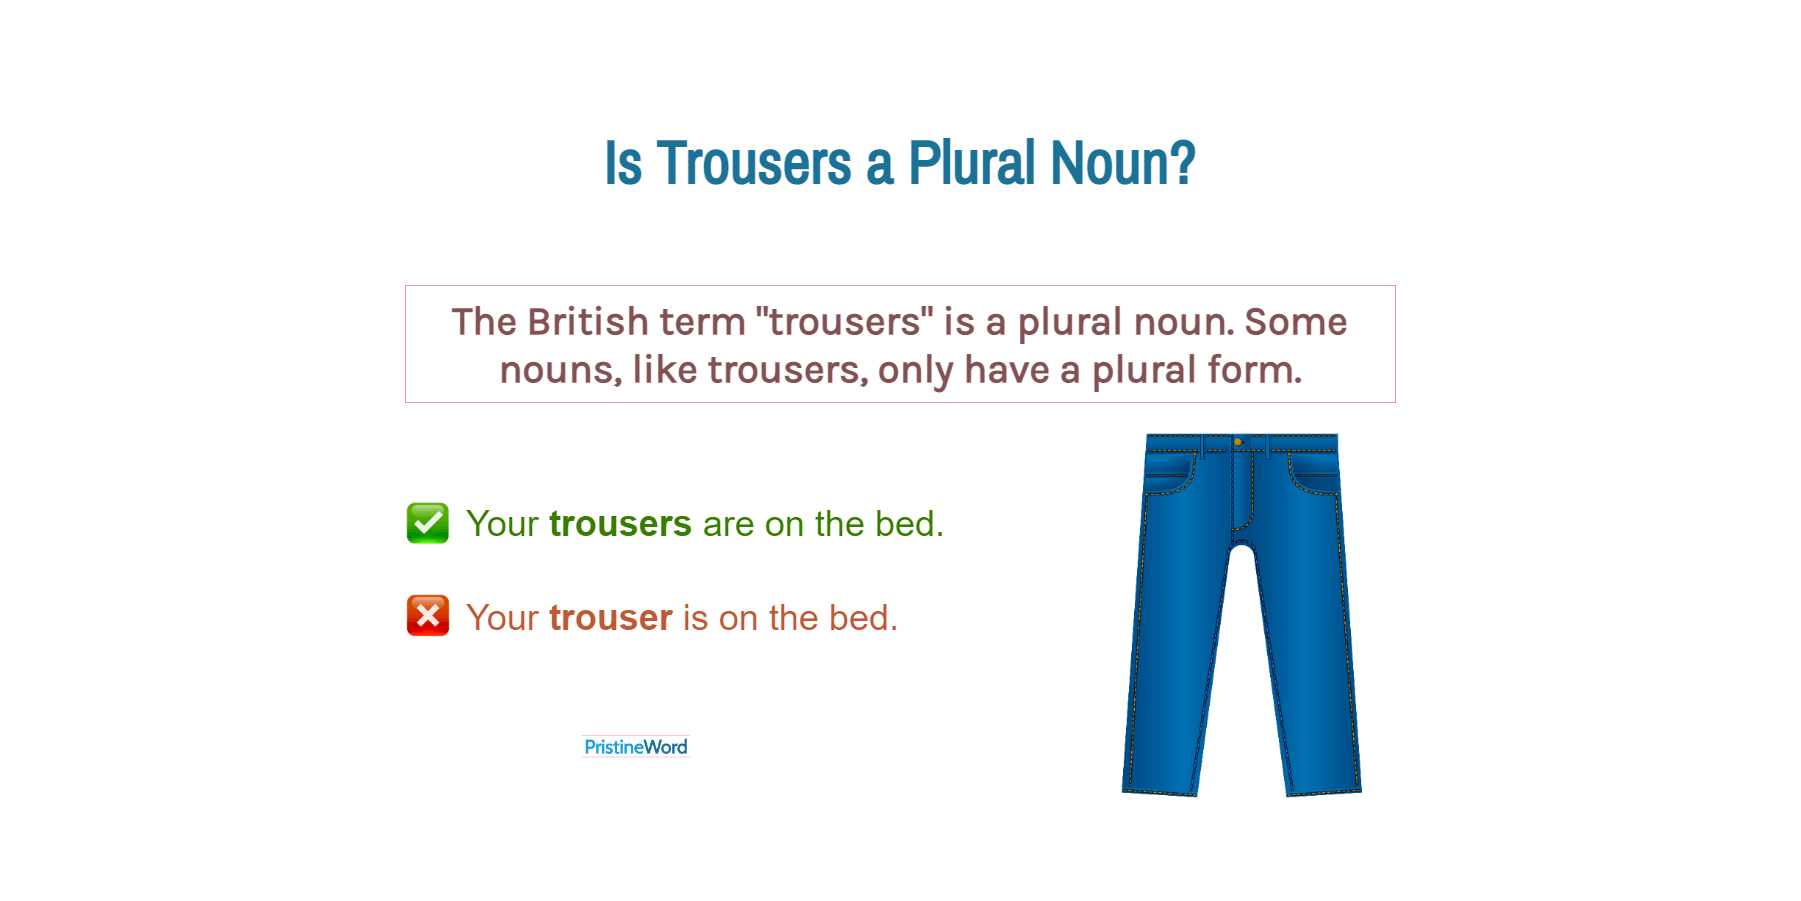 A Trousers or a Pair of Trousers Which Is Correct